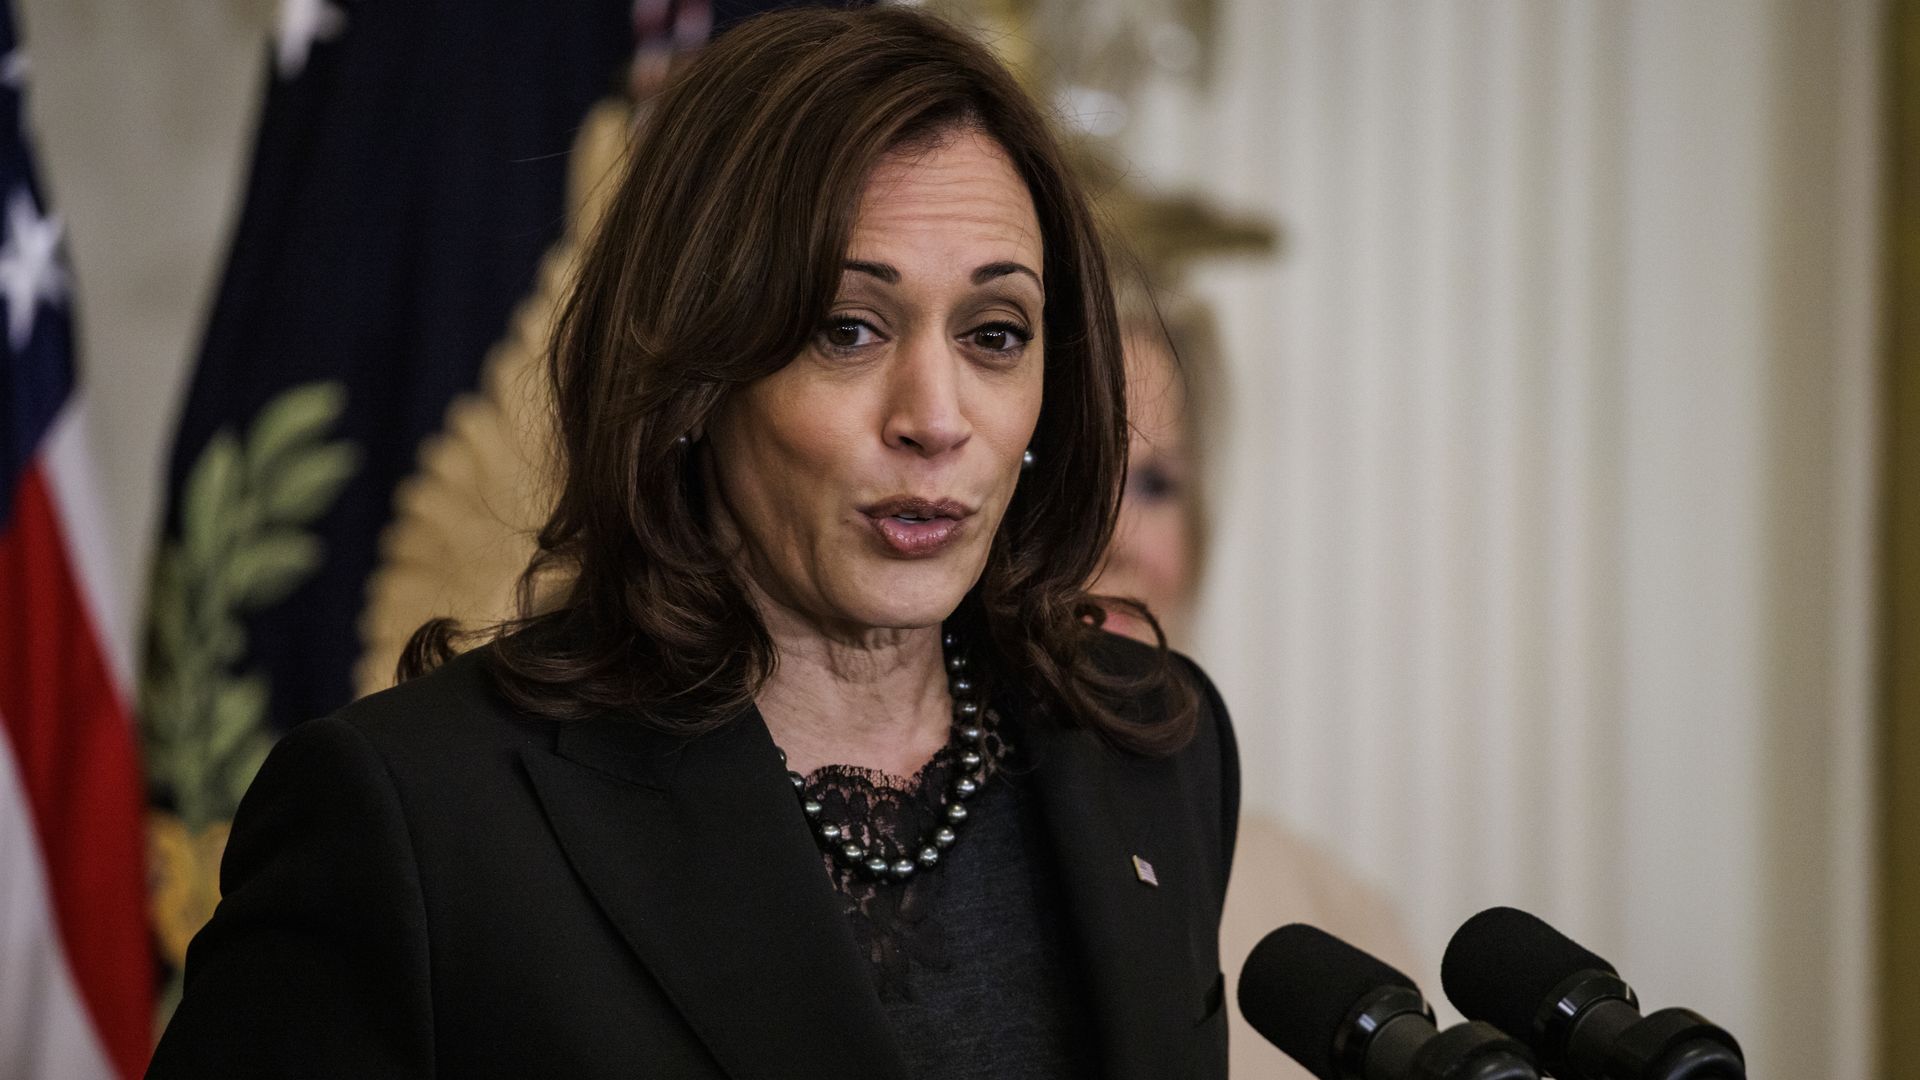 U.S. Vice President Kamala Harris speaks in the East Room of the White House in Washington, D.C. on March 3, 2022. 